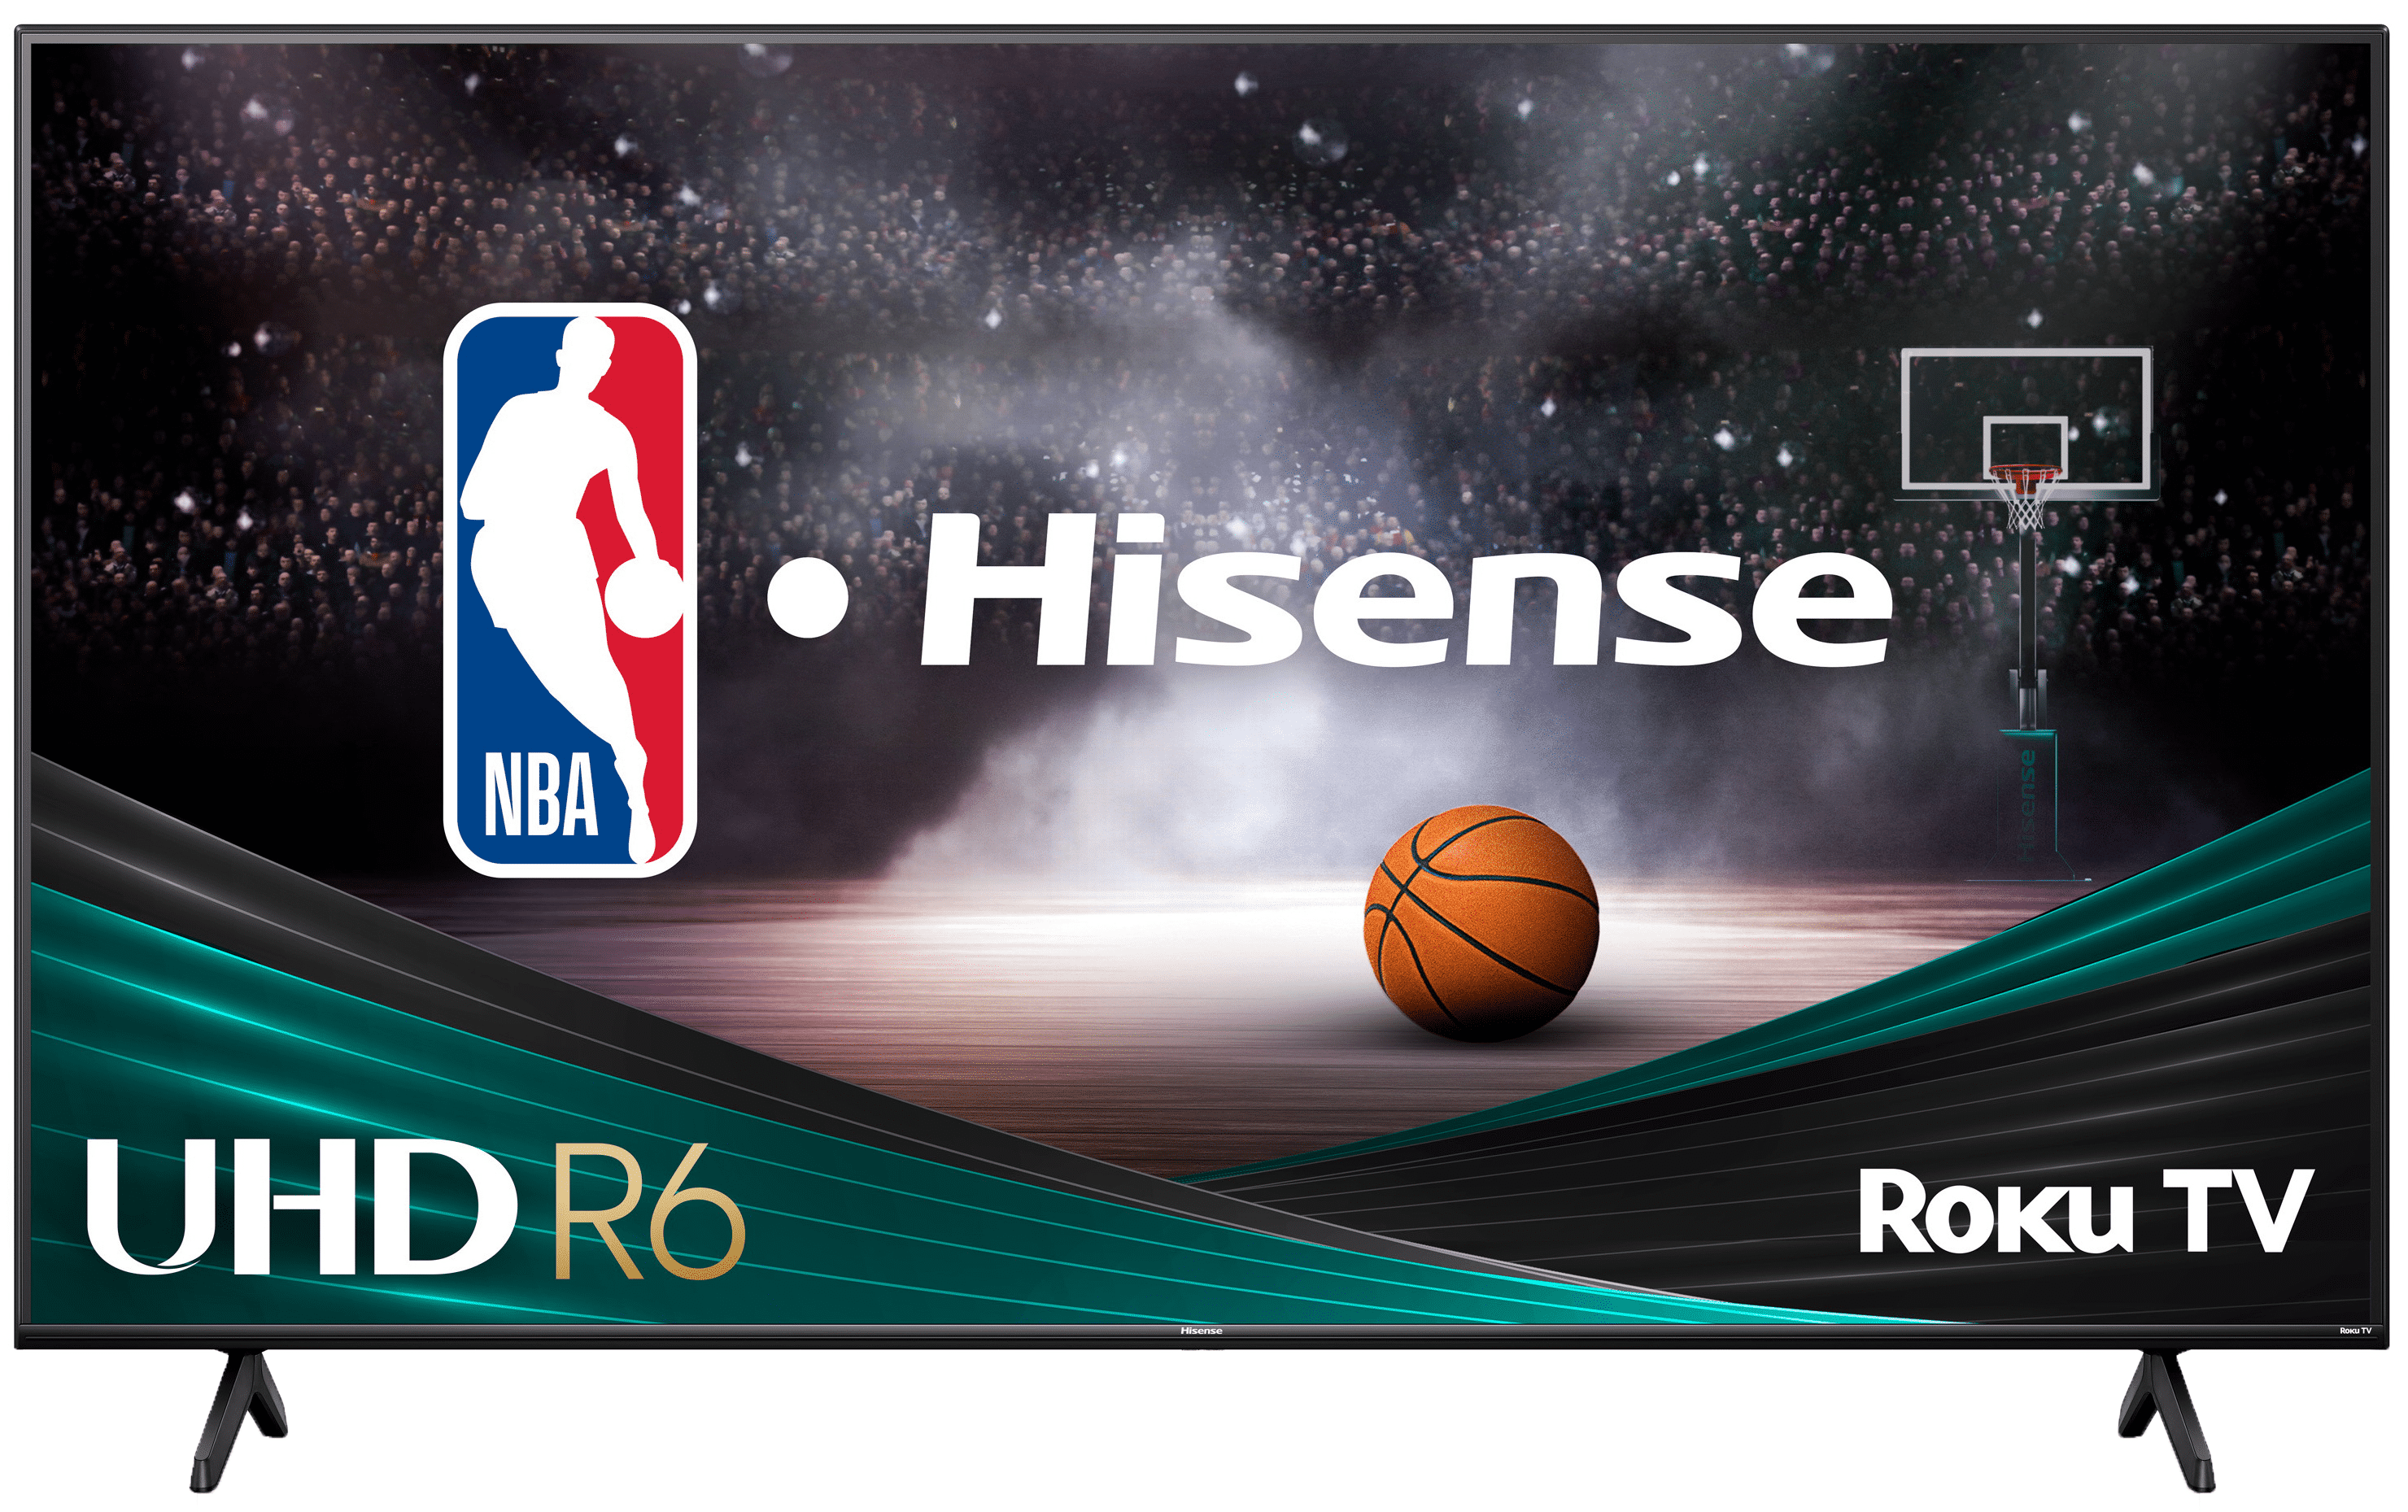 Hisense 58-inch 4K UHD Roku Smart TV HDR R6 Series - Stunning Picture,  Streaming Apps, Voice Control